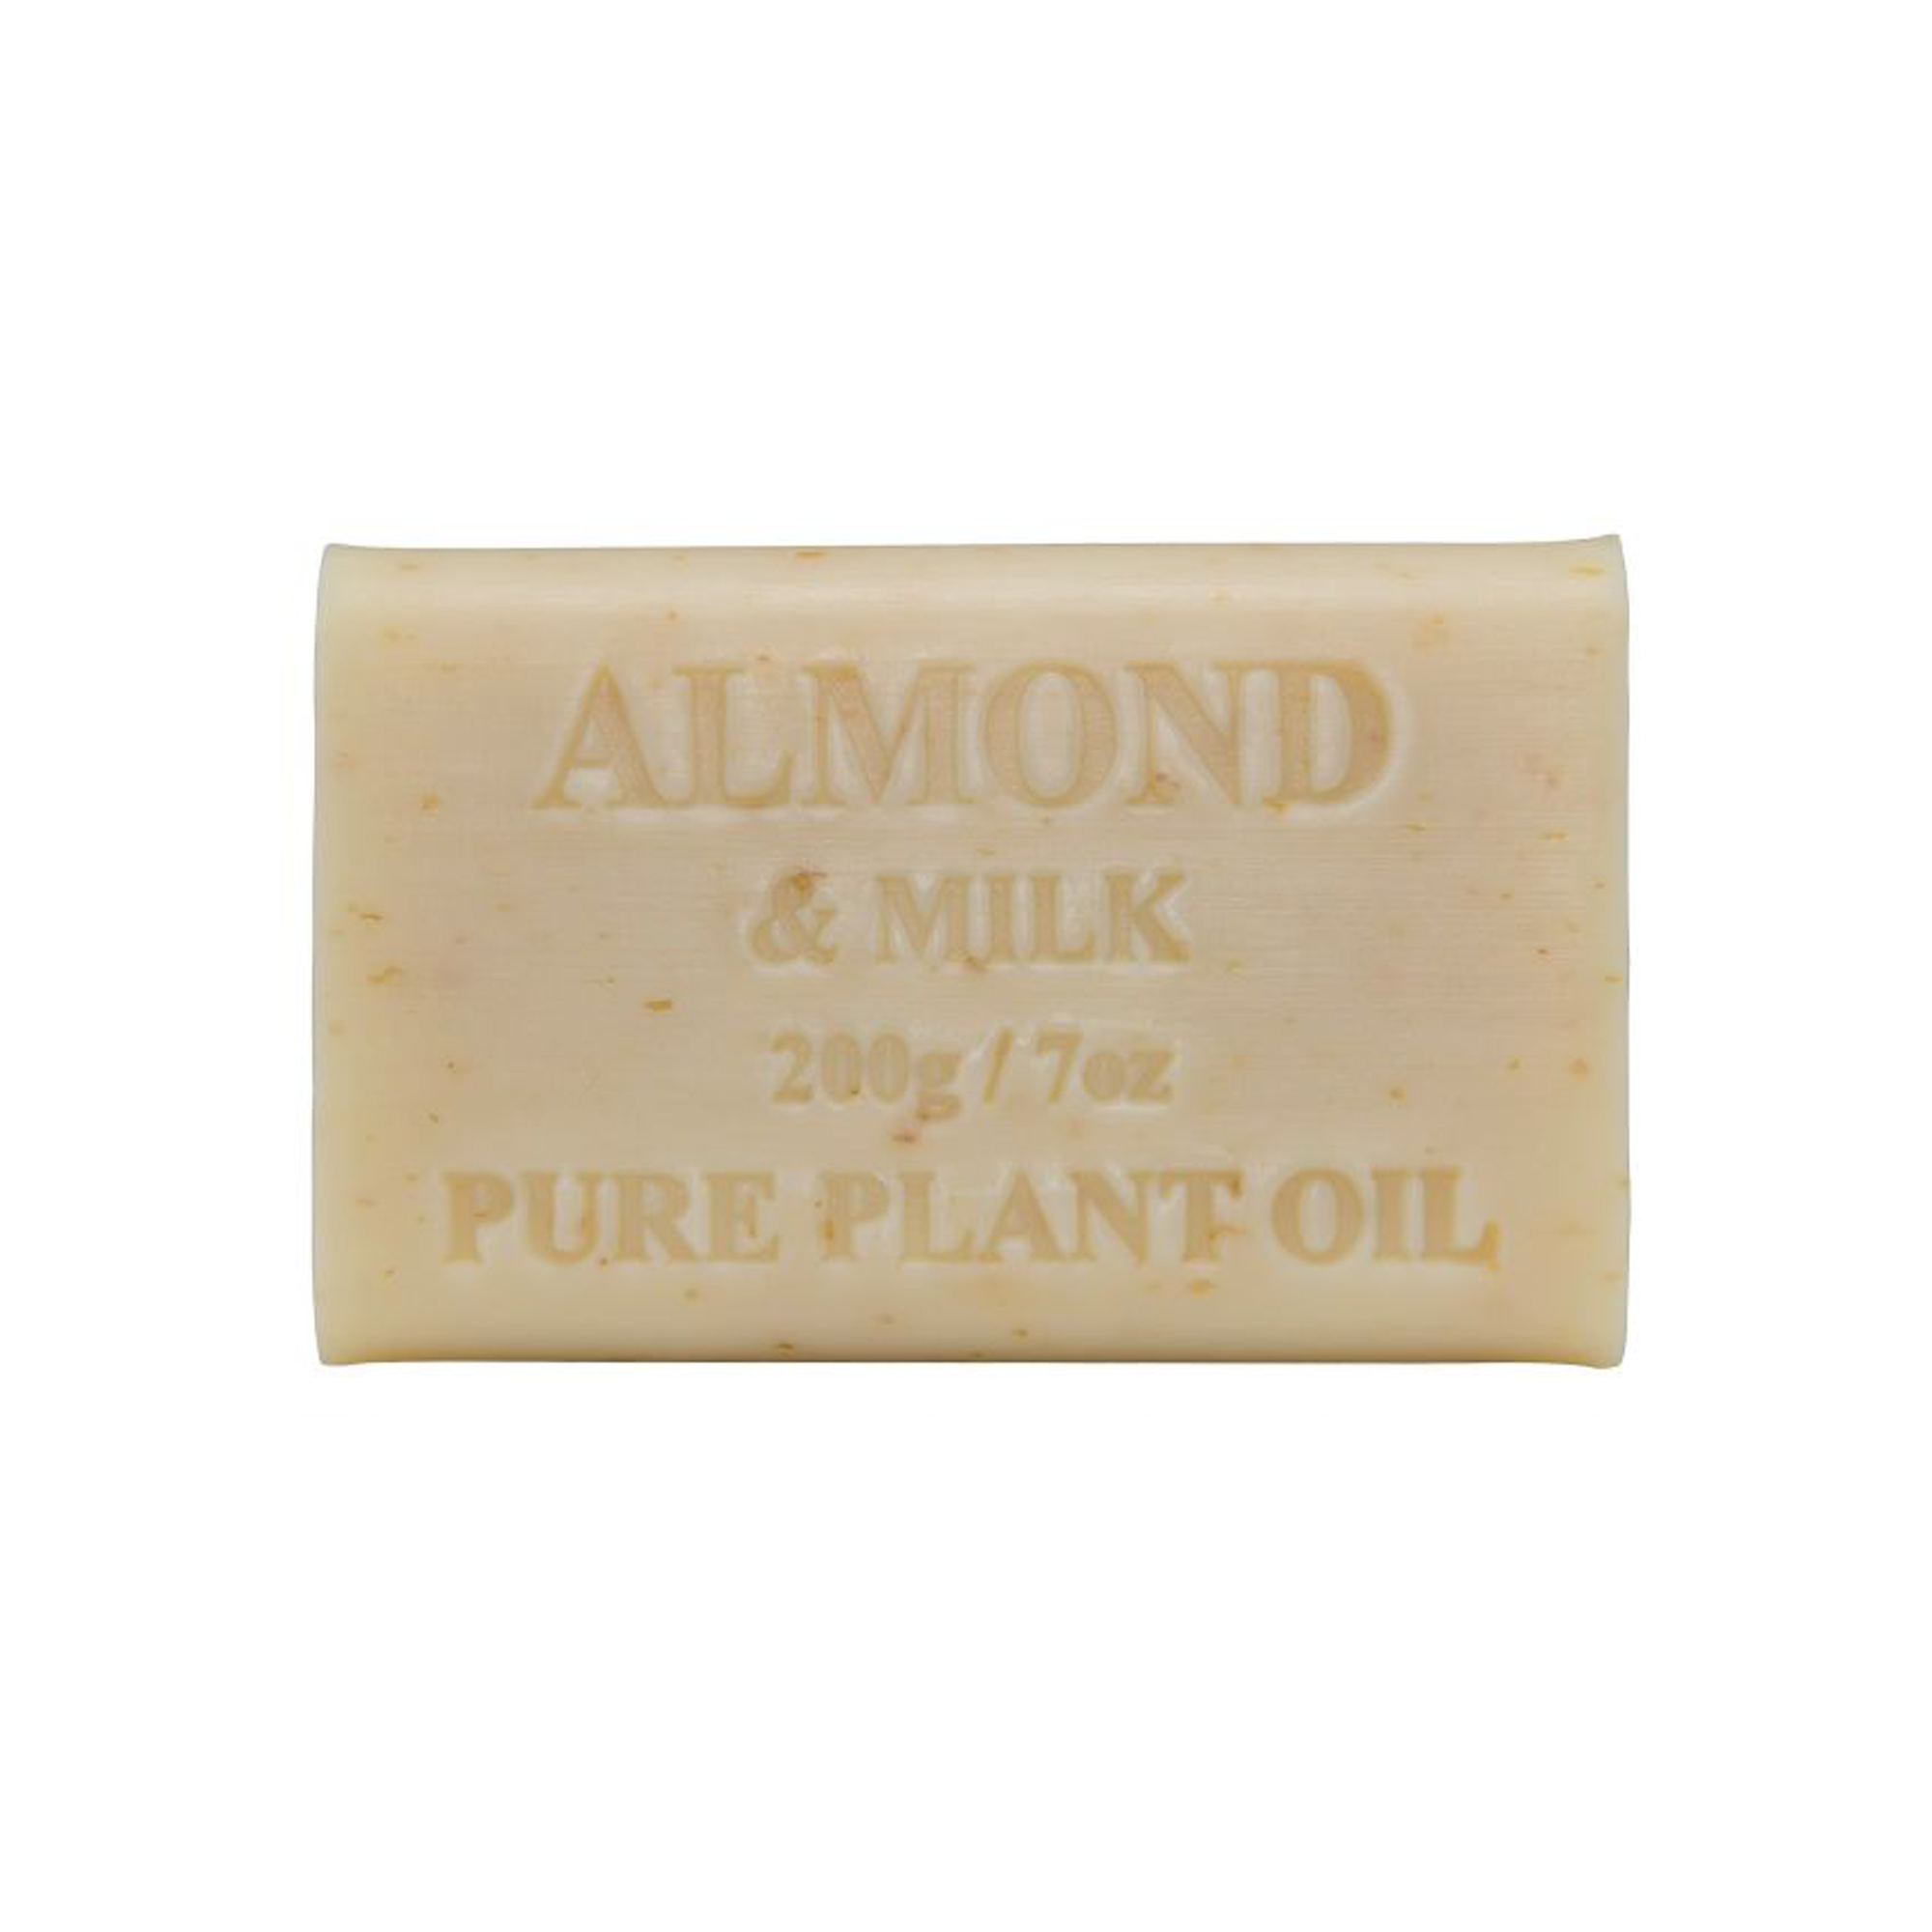 Almond and Milk 200g